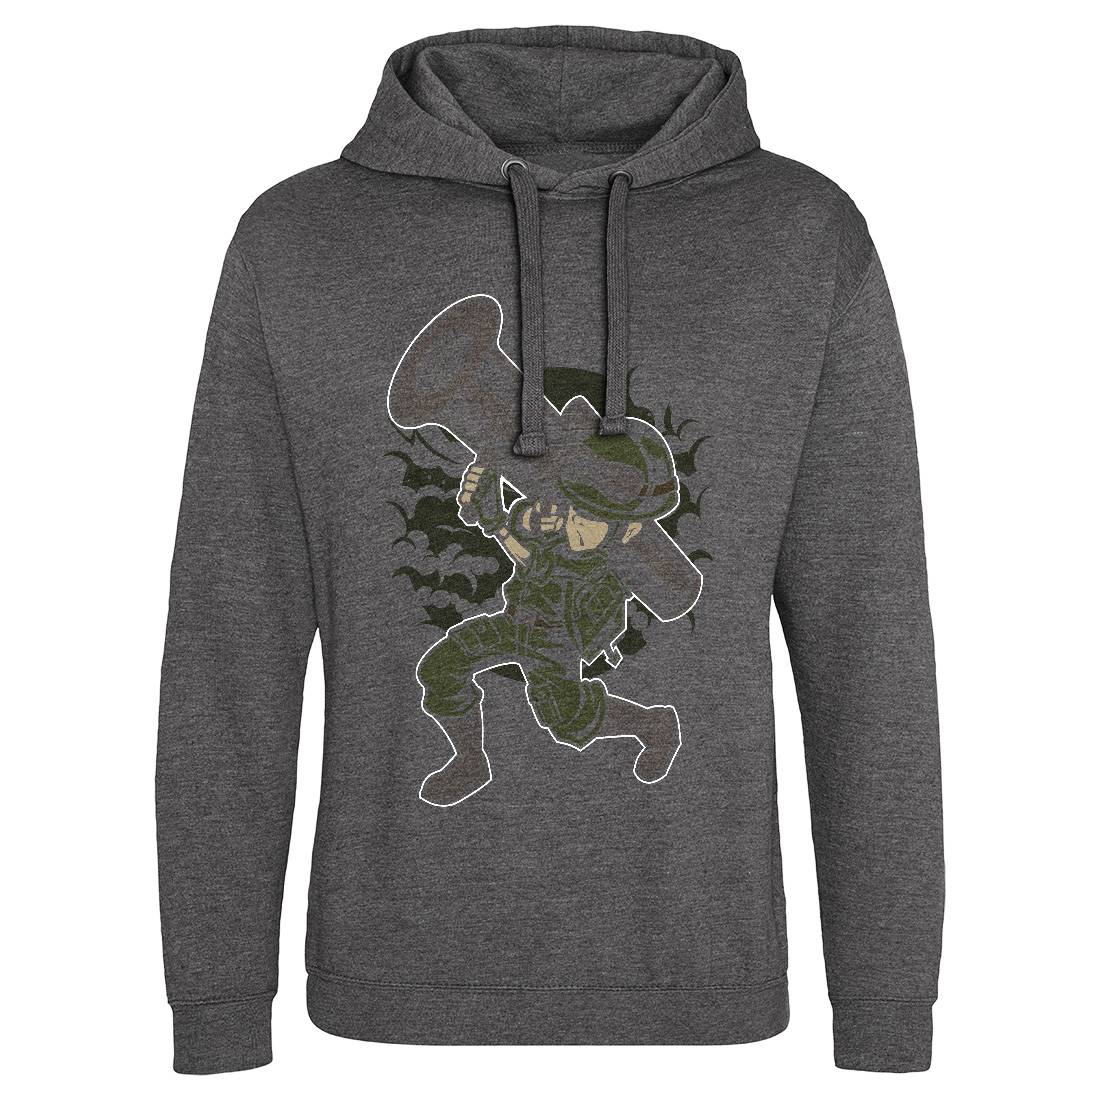 Rocket Launcher Mens Hoodie Without Pocket Army C427